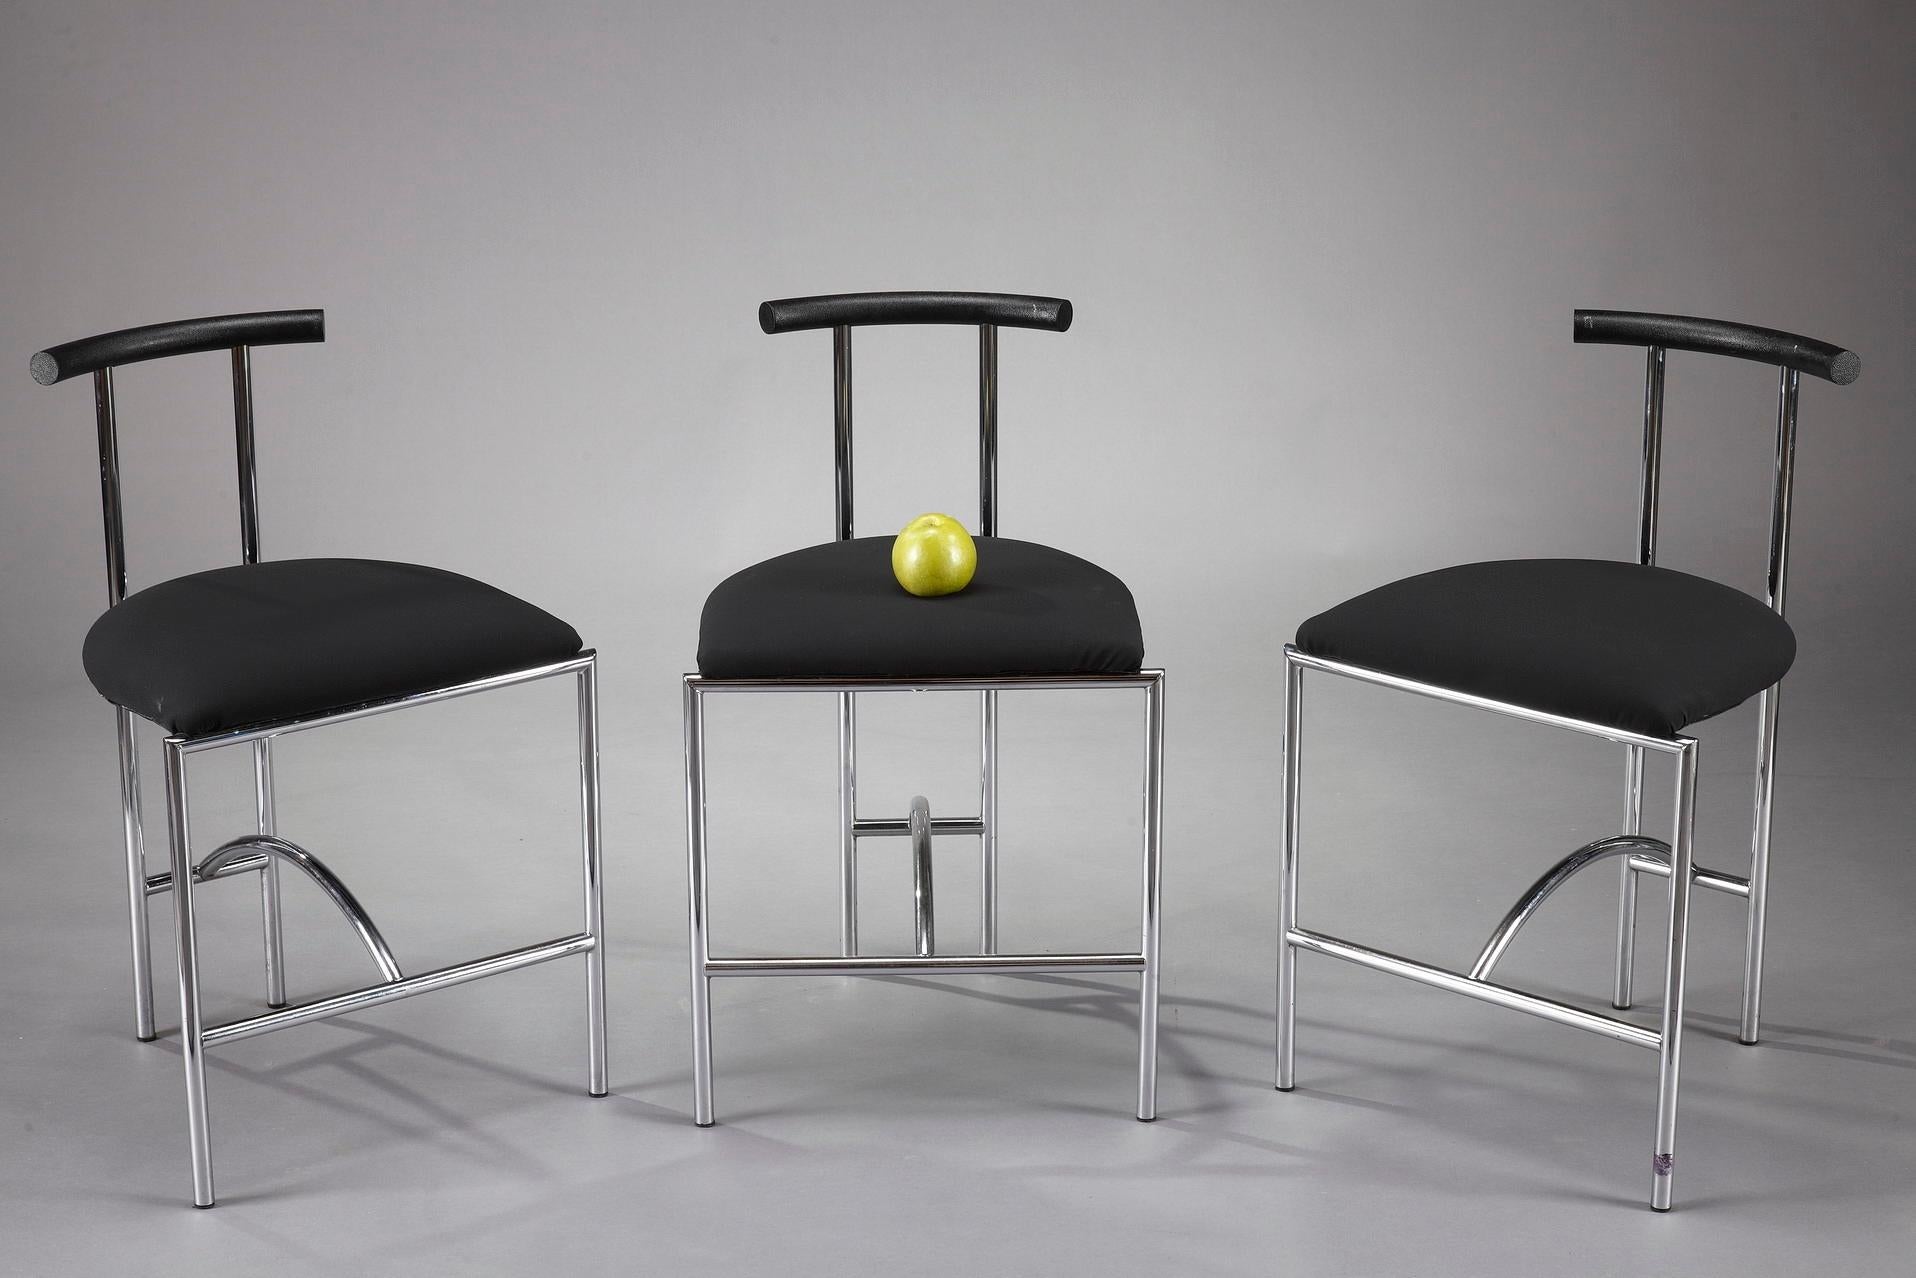 Set of 3 Tokyo chairs designed by Rodney Kinsman (British, b. 1943) for Bieffeplast, Italy, 1985. This design stool is beautiful because of its simplicity. It is made of chrome-plated tubular steel, rubber and black fabric upholstery. Original 1990s